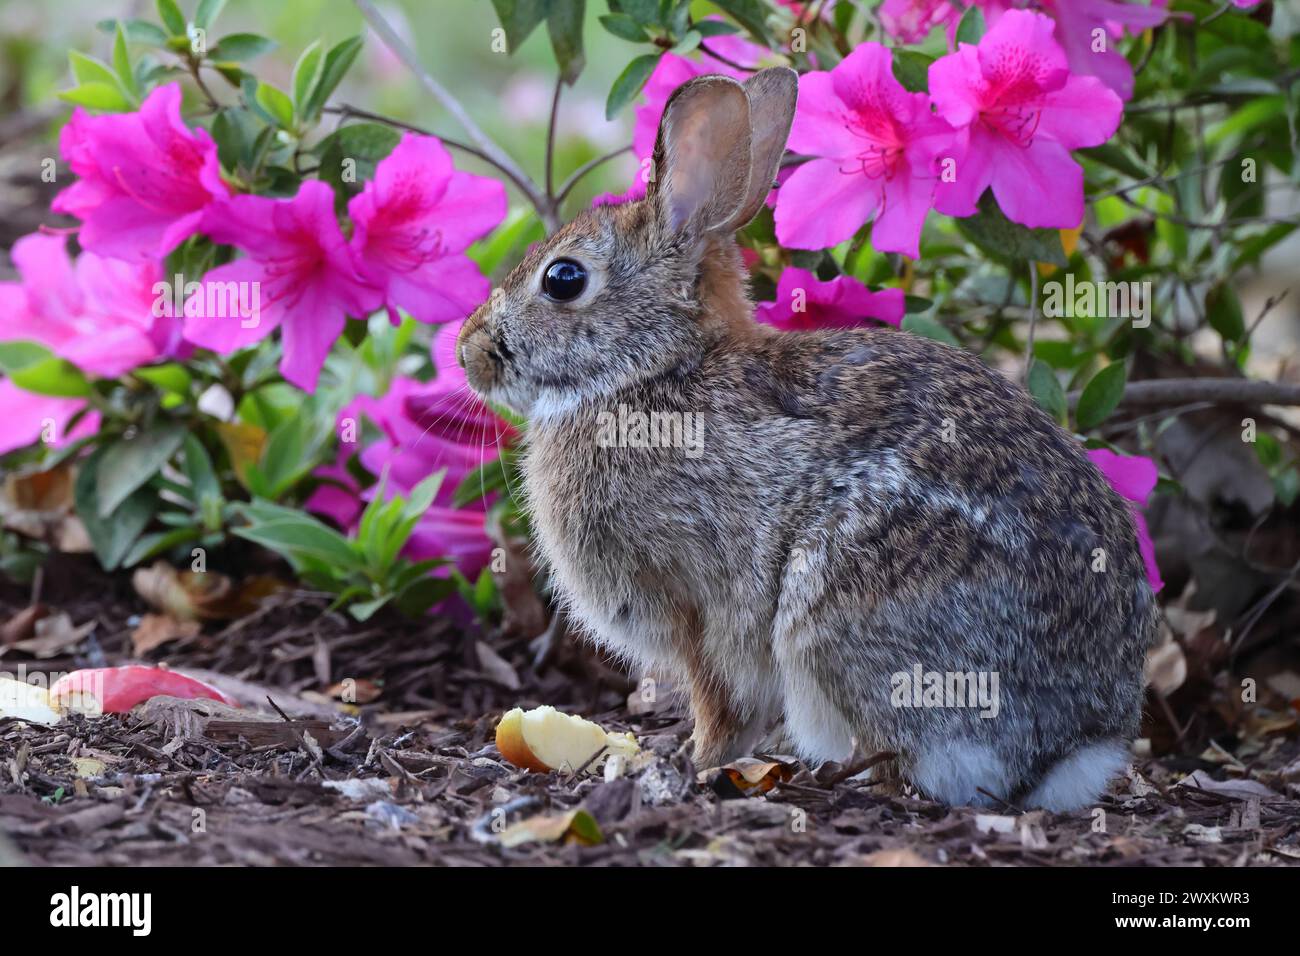 A small bunny near flowers and trees in solitude Stock Photo